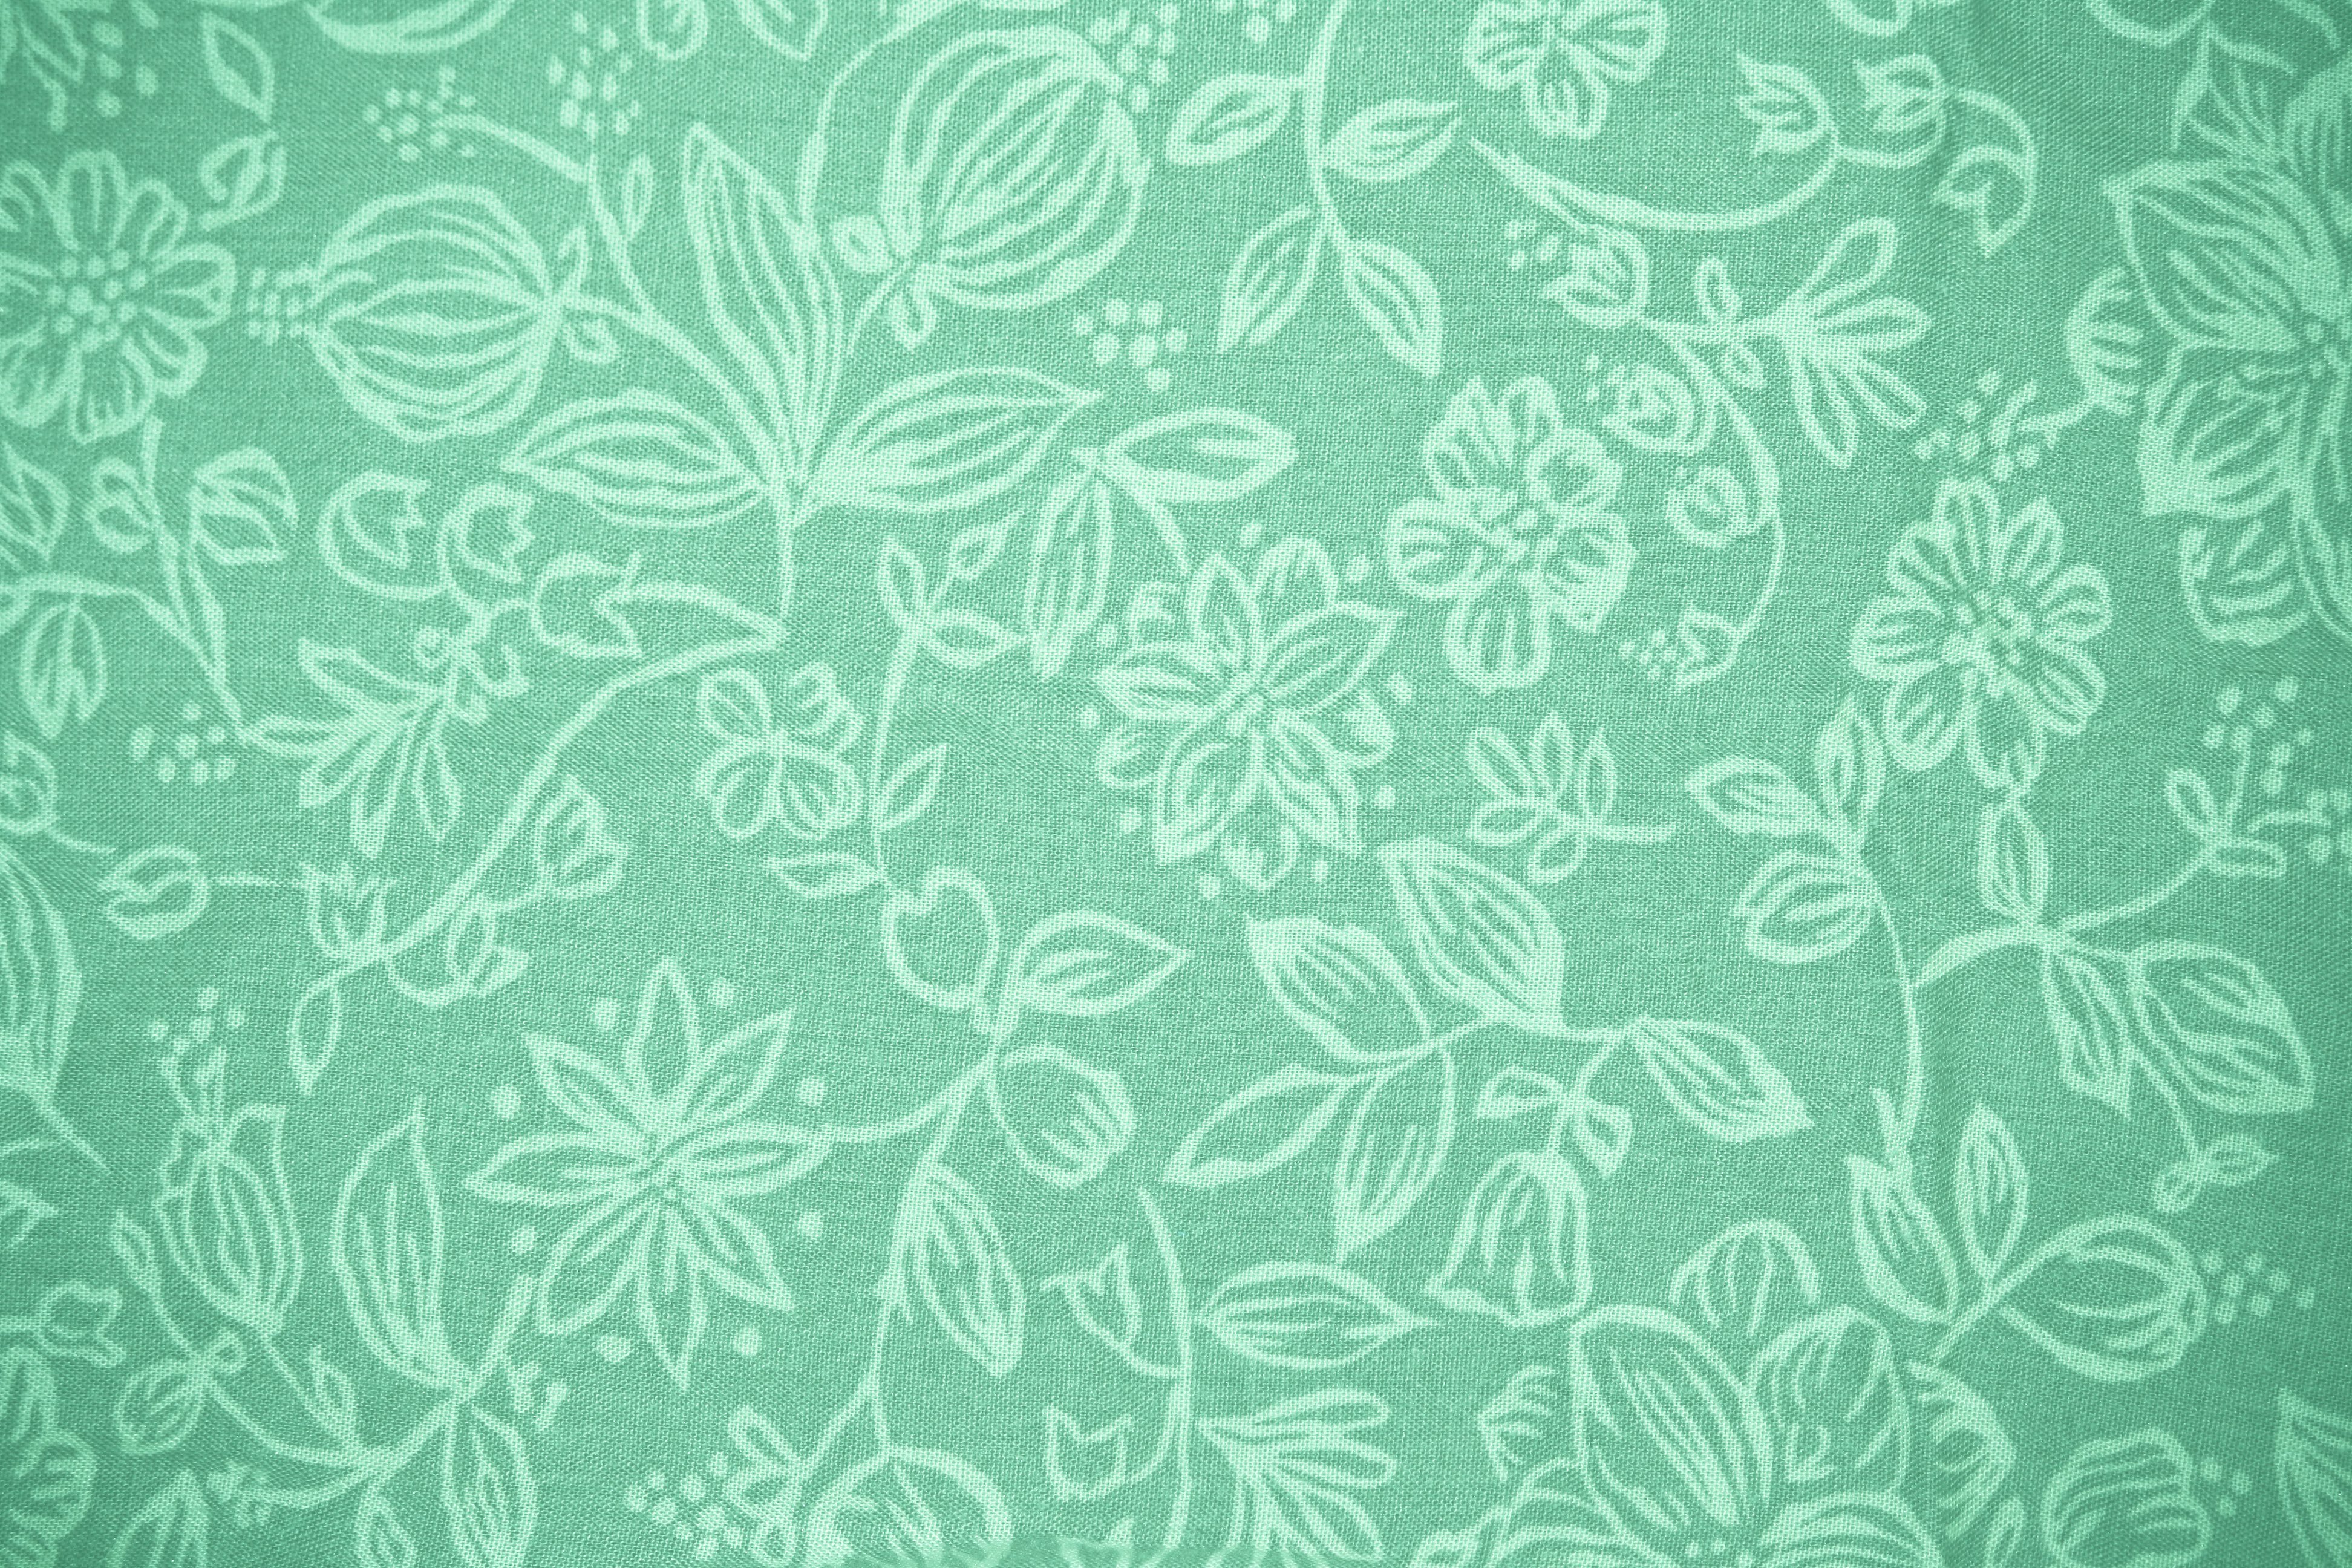 Mint Green Fabric with Floral Pattern Texture Picture | Free ...